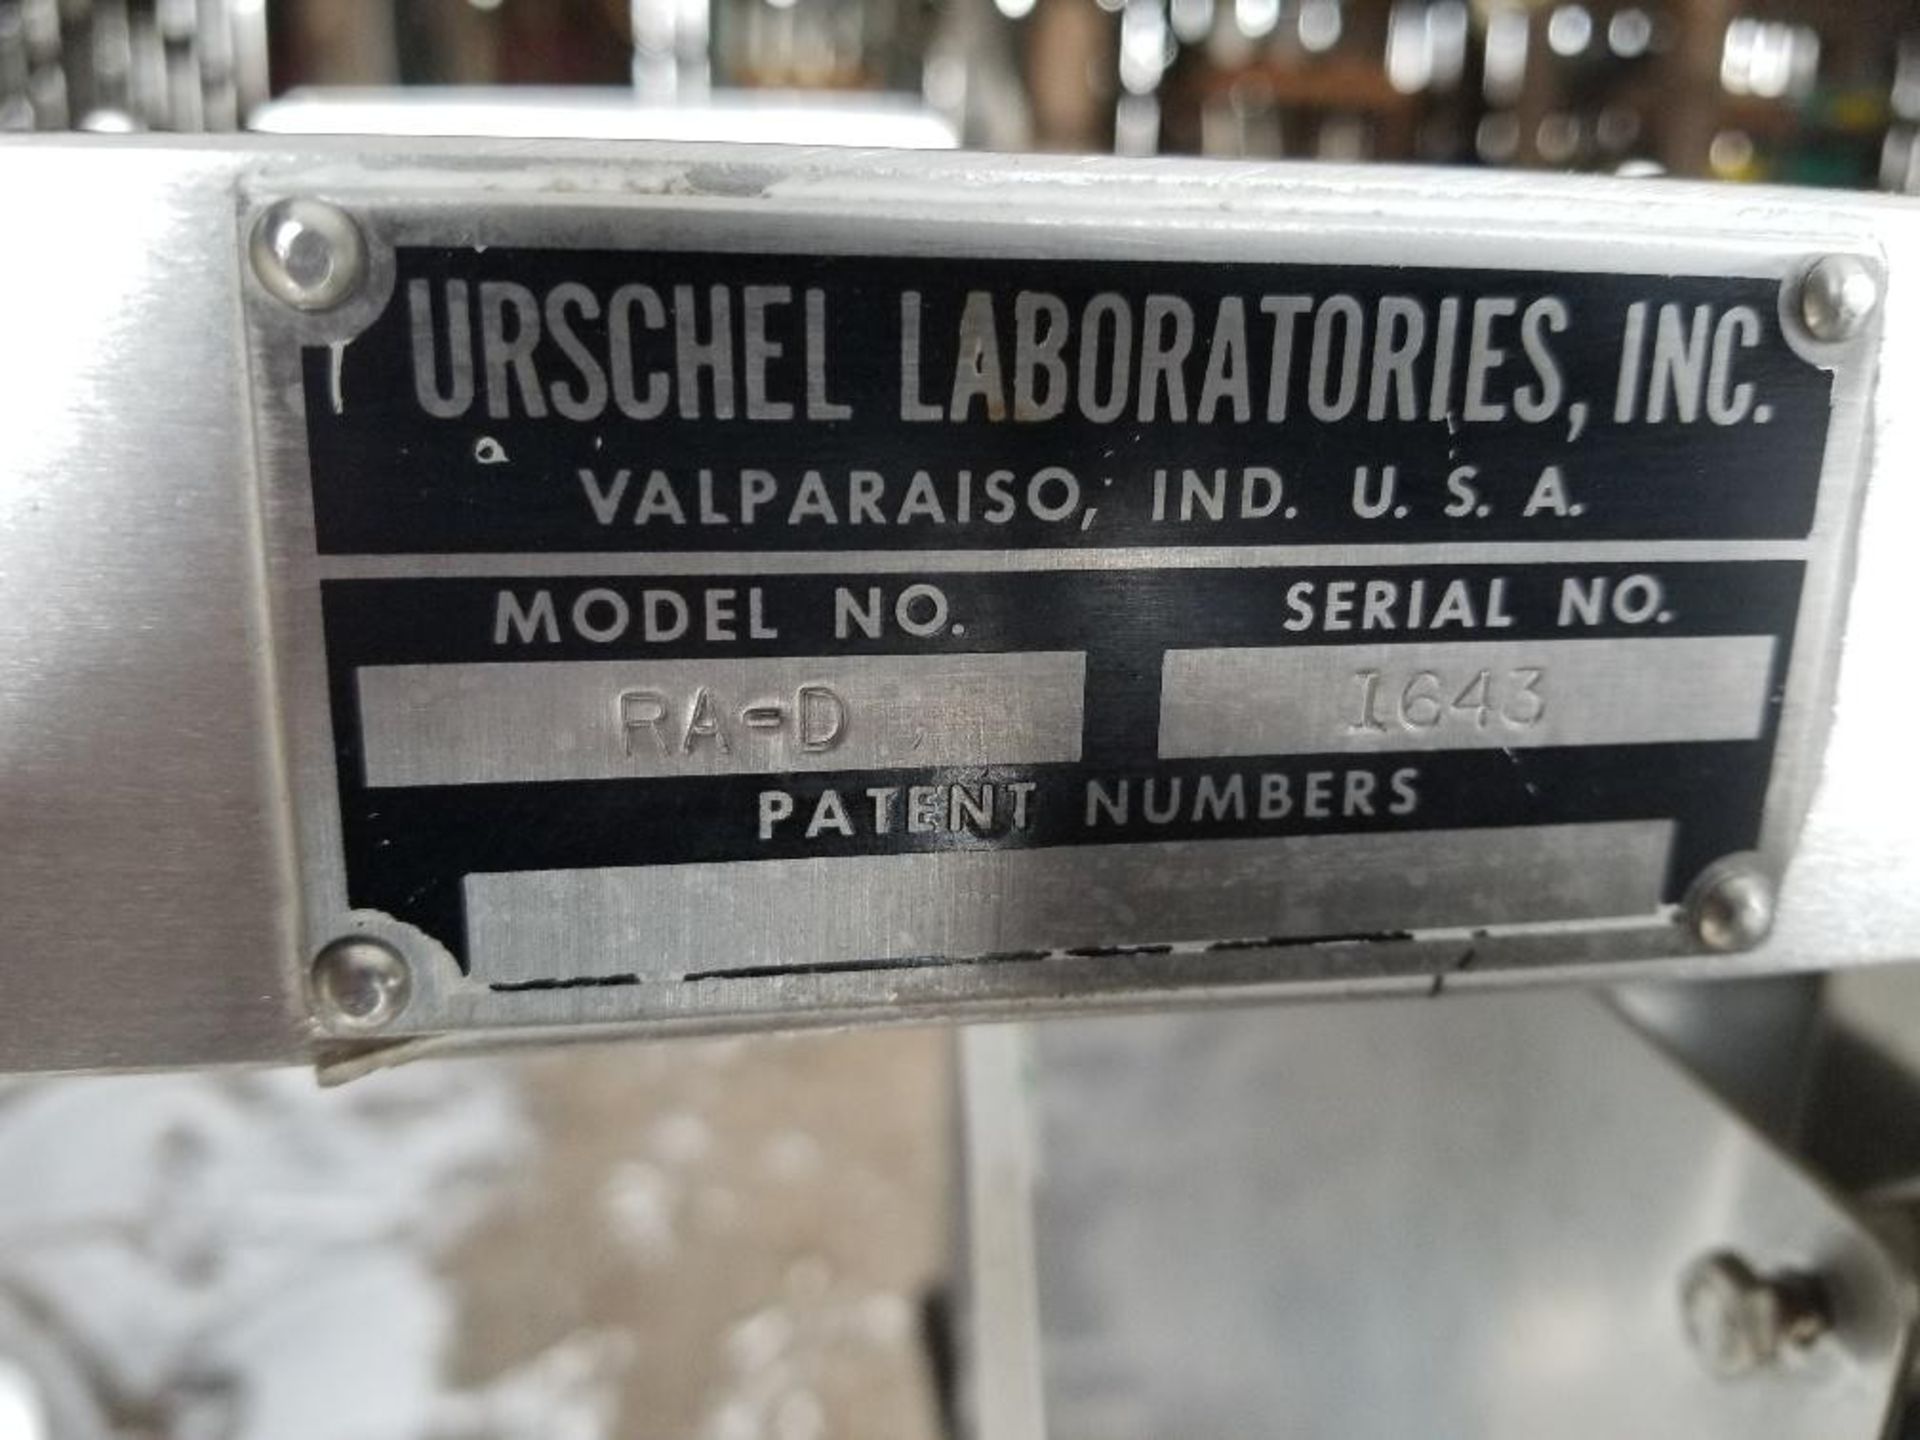 Urschel RAD S/S Sanitary Dicer, Model RA-D, S/N 1643 - Portable on Casters. This unit was last used - Image 7 of 11